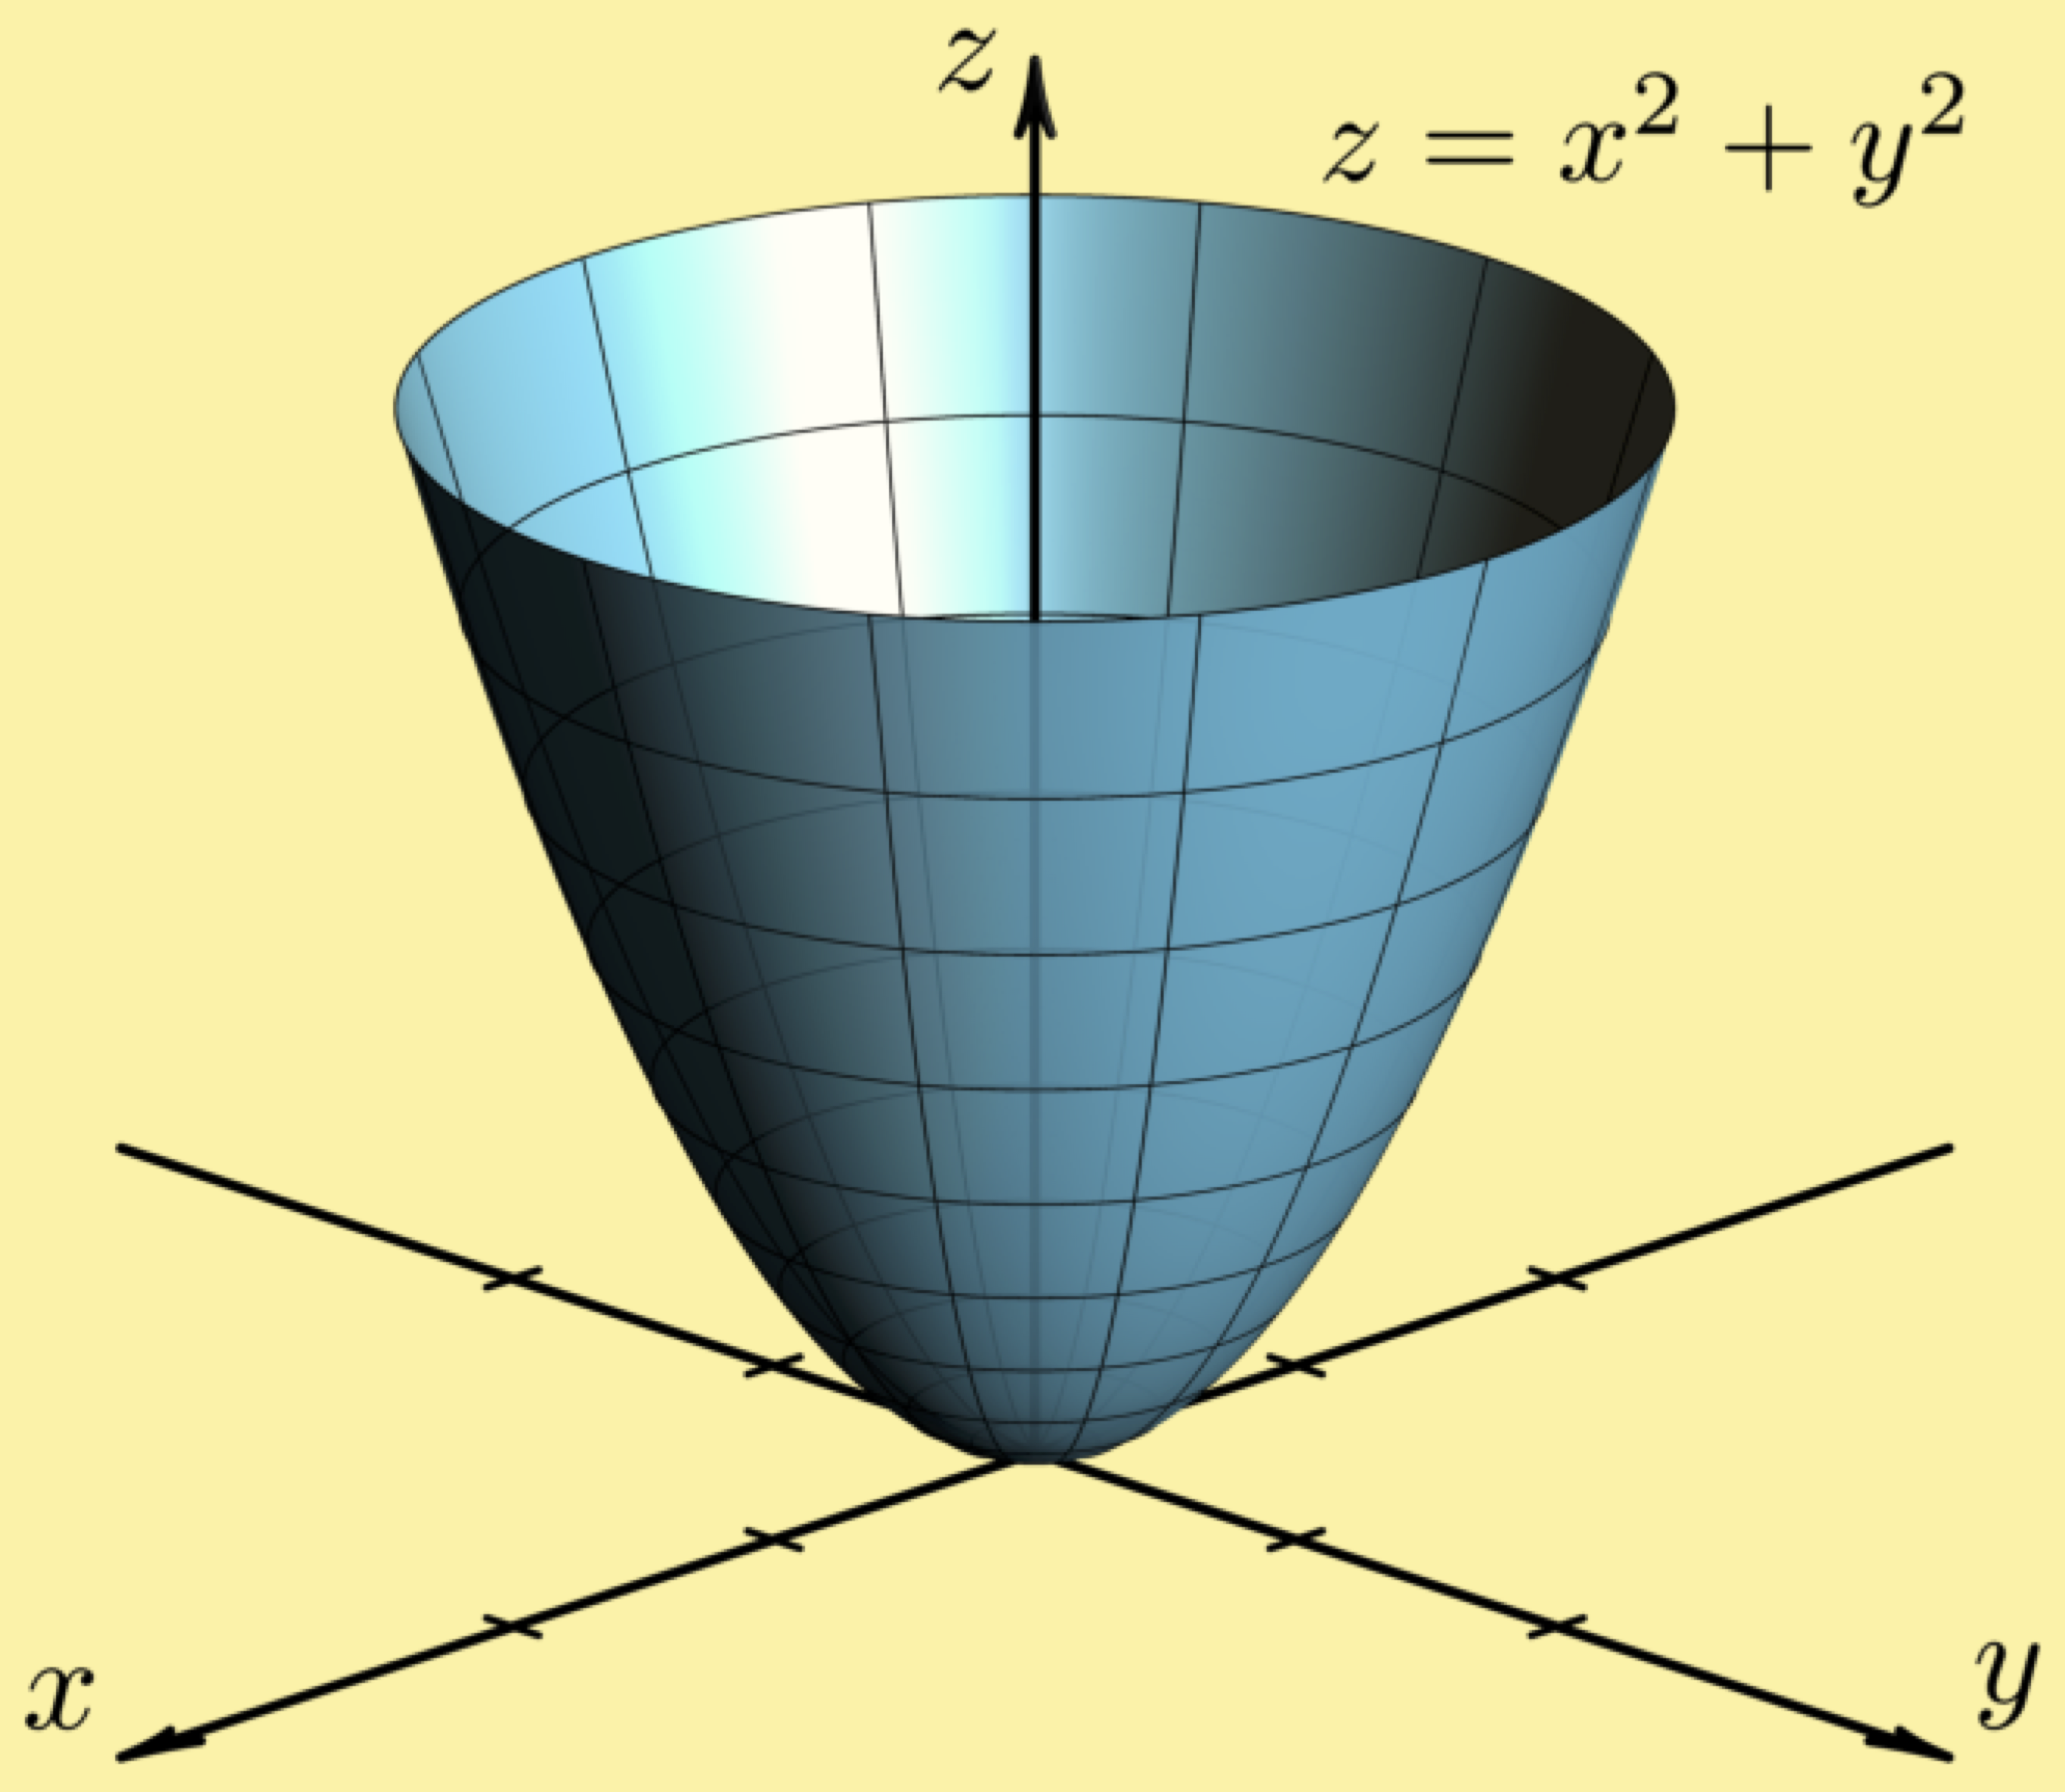 traces paraboloid 3-space coordinate system xyz R3 Cartesian three-space